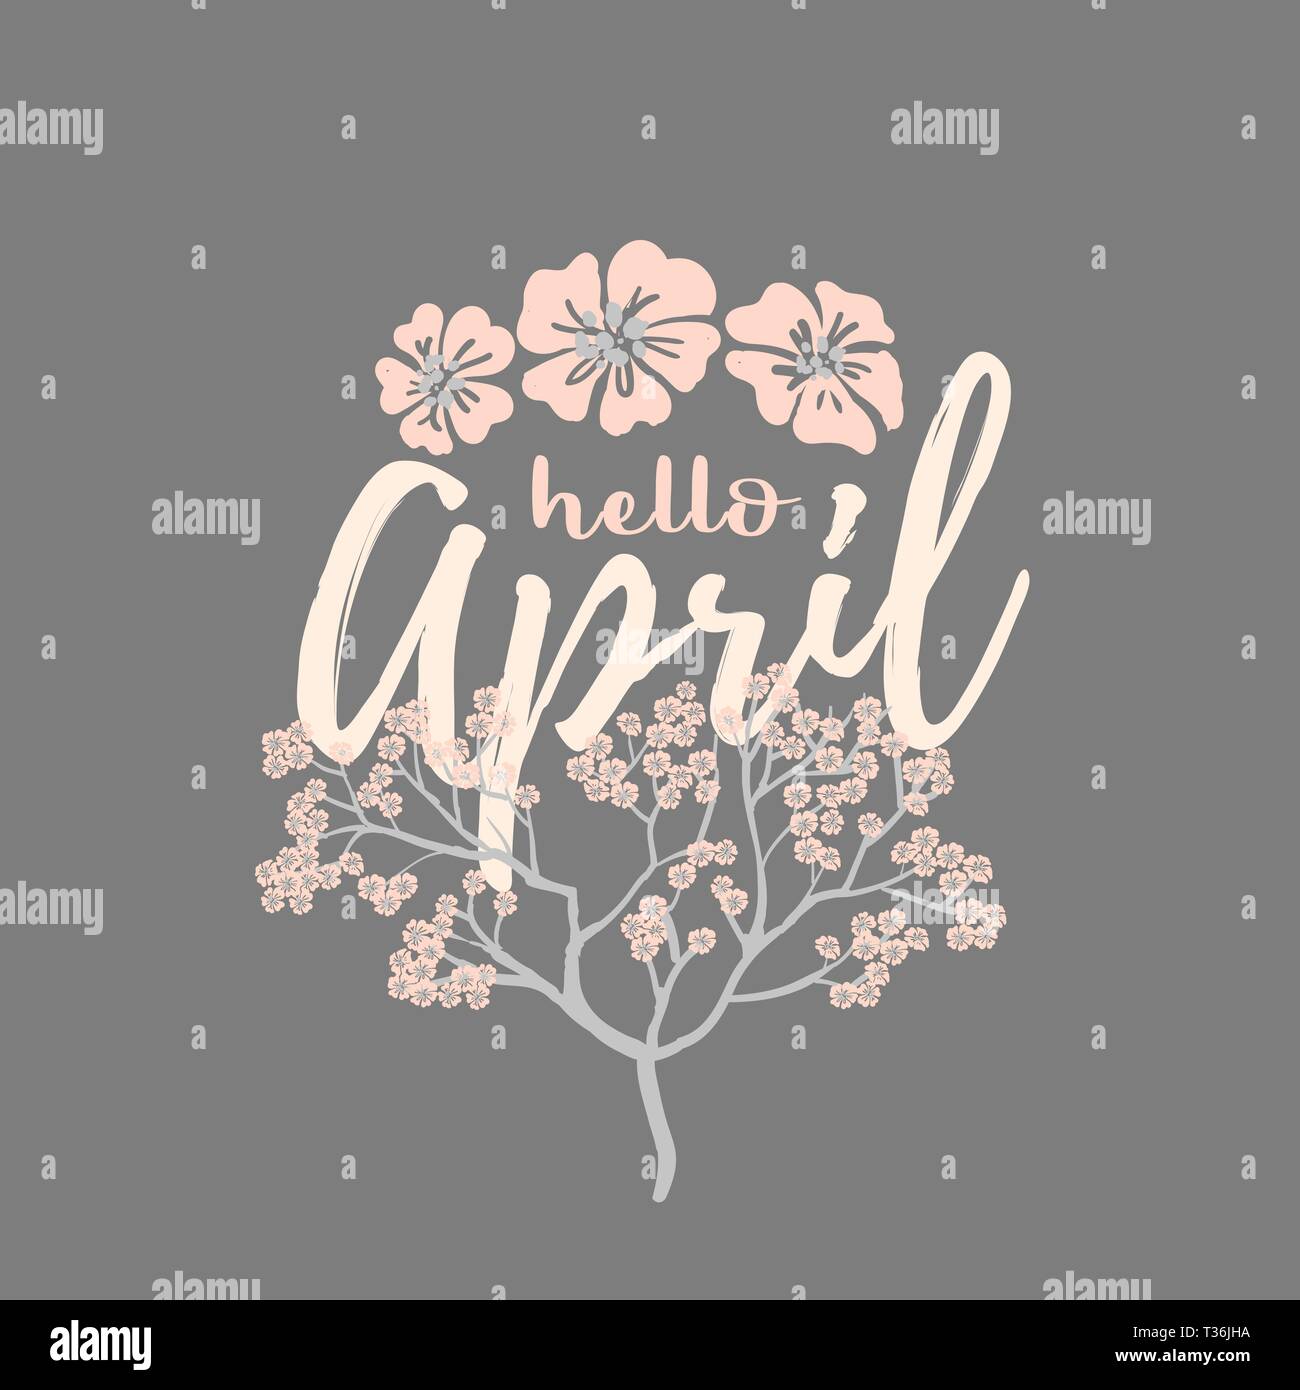 Hello april card with Cherry Blossom Spring Flower tree Stock Vector